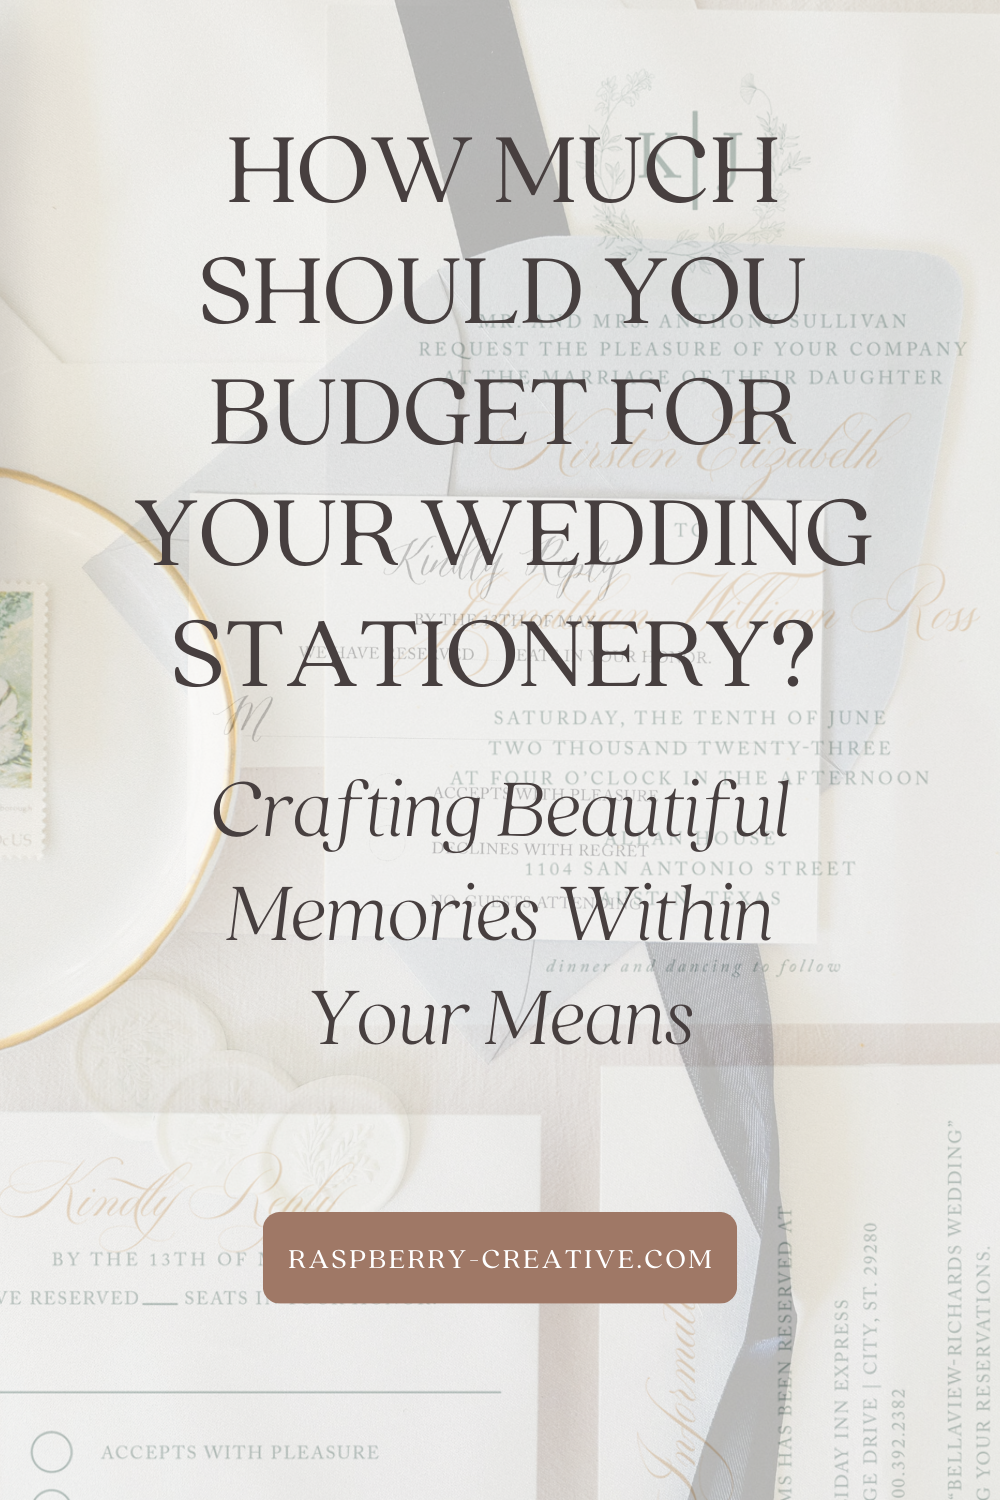 How Much Should You Budget for Your Wedding Stationery? Crafting Beautiful Memories Within Your Means